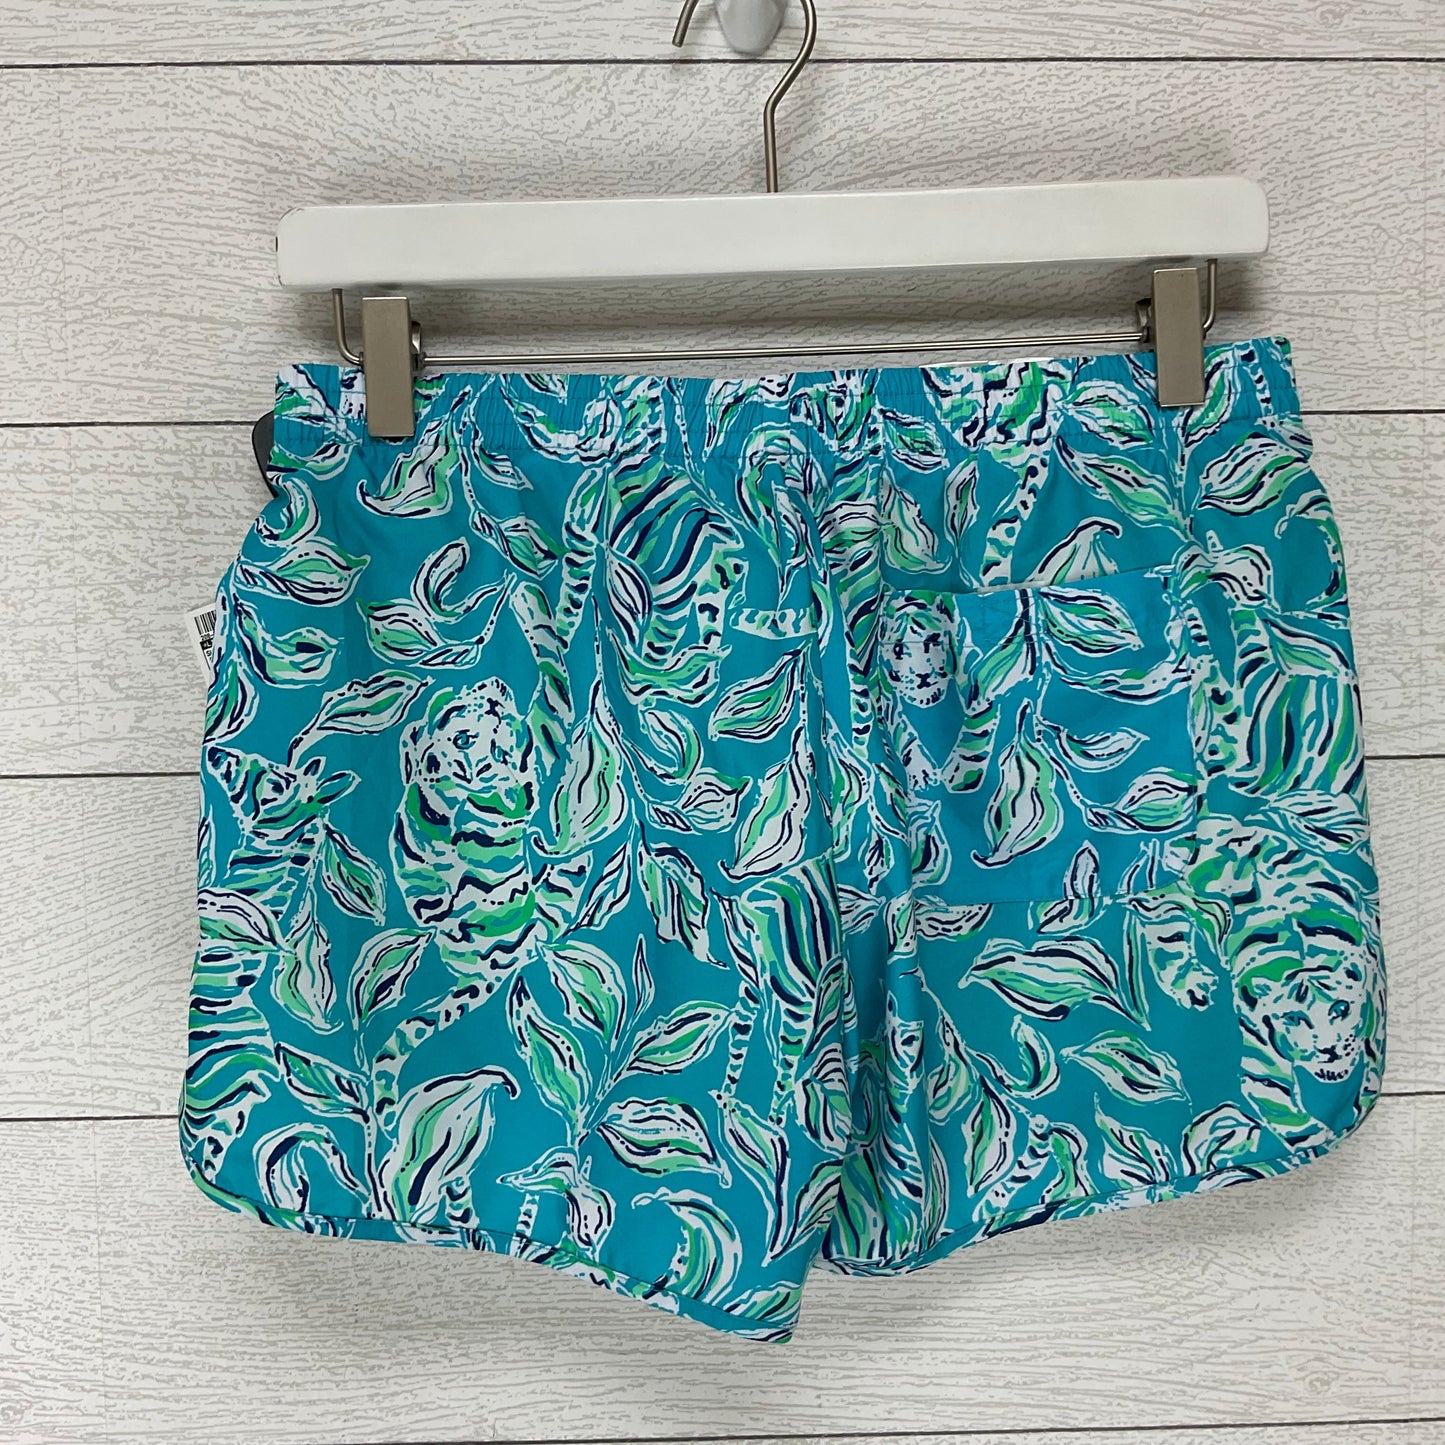 Shorts Designer By Lilly Pulitzer  Size: S